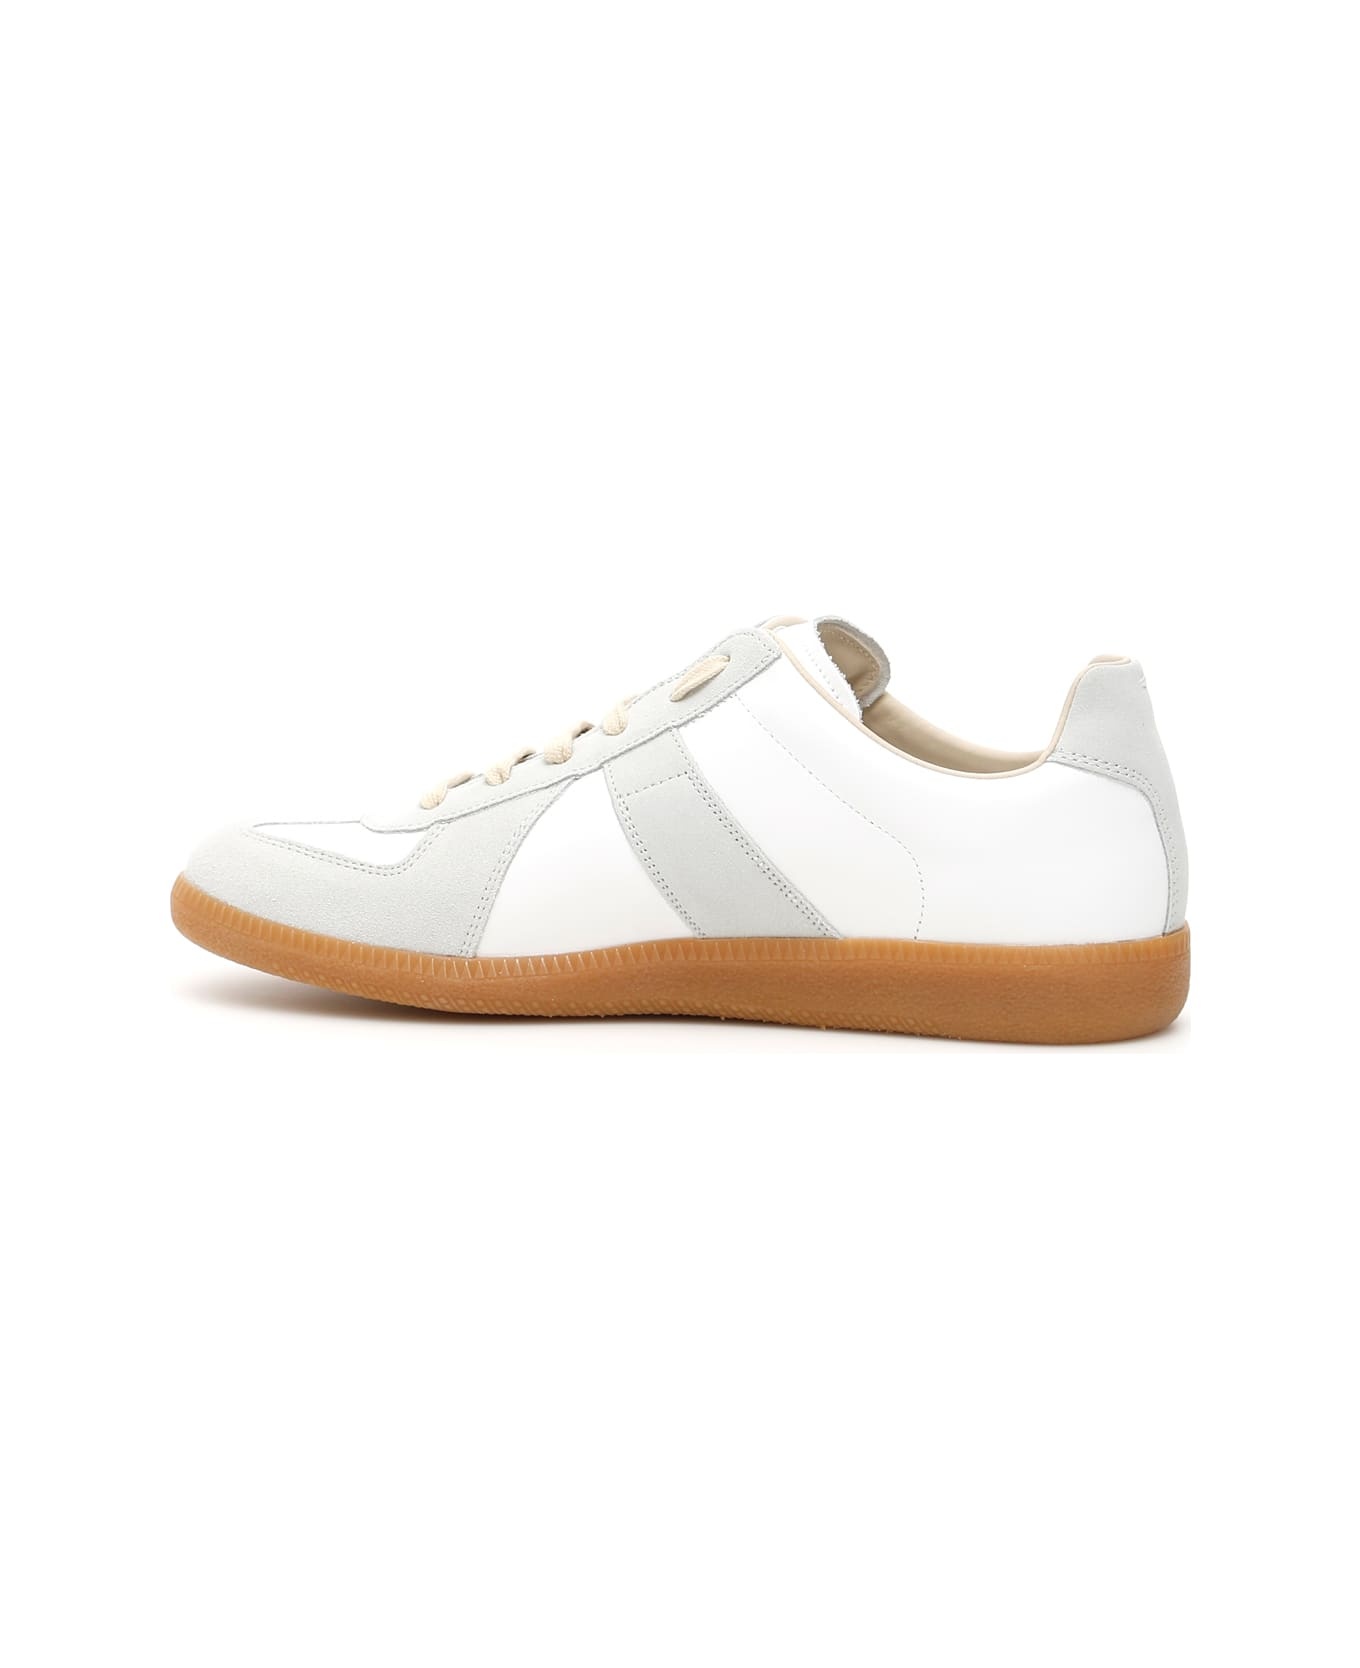 Replica Leather Sneakers - 3